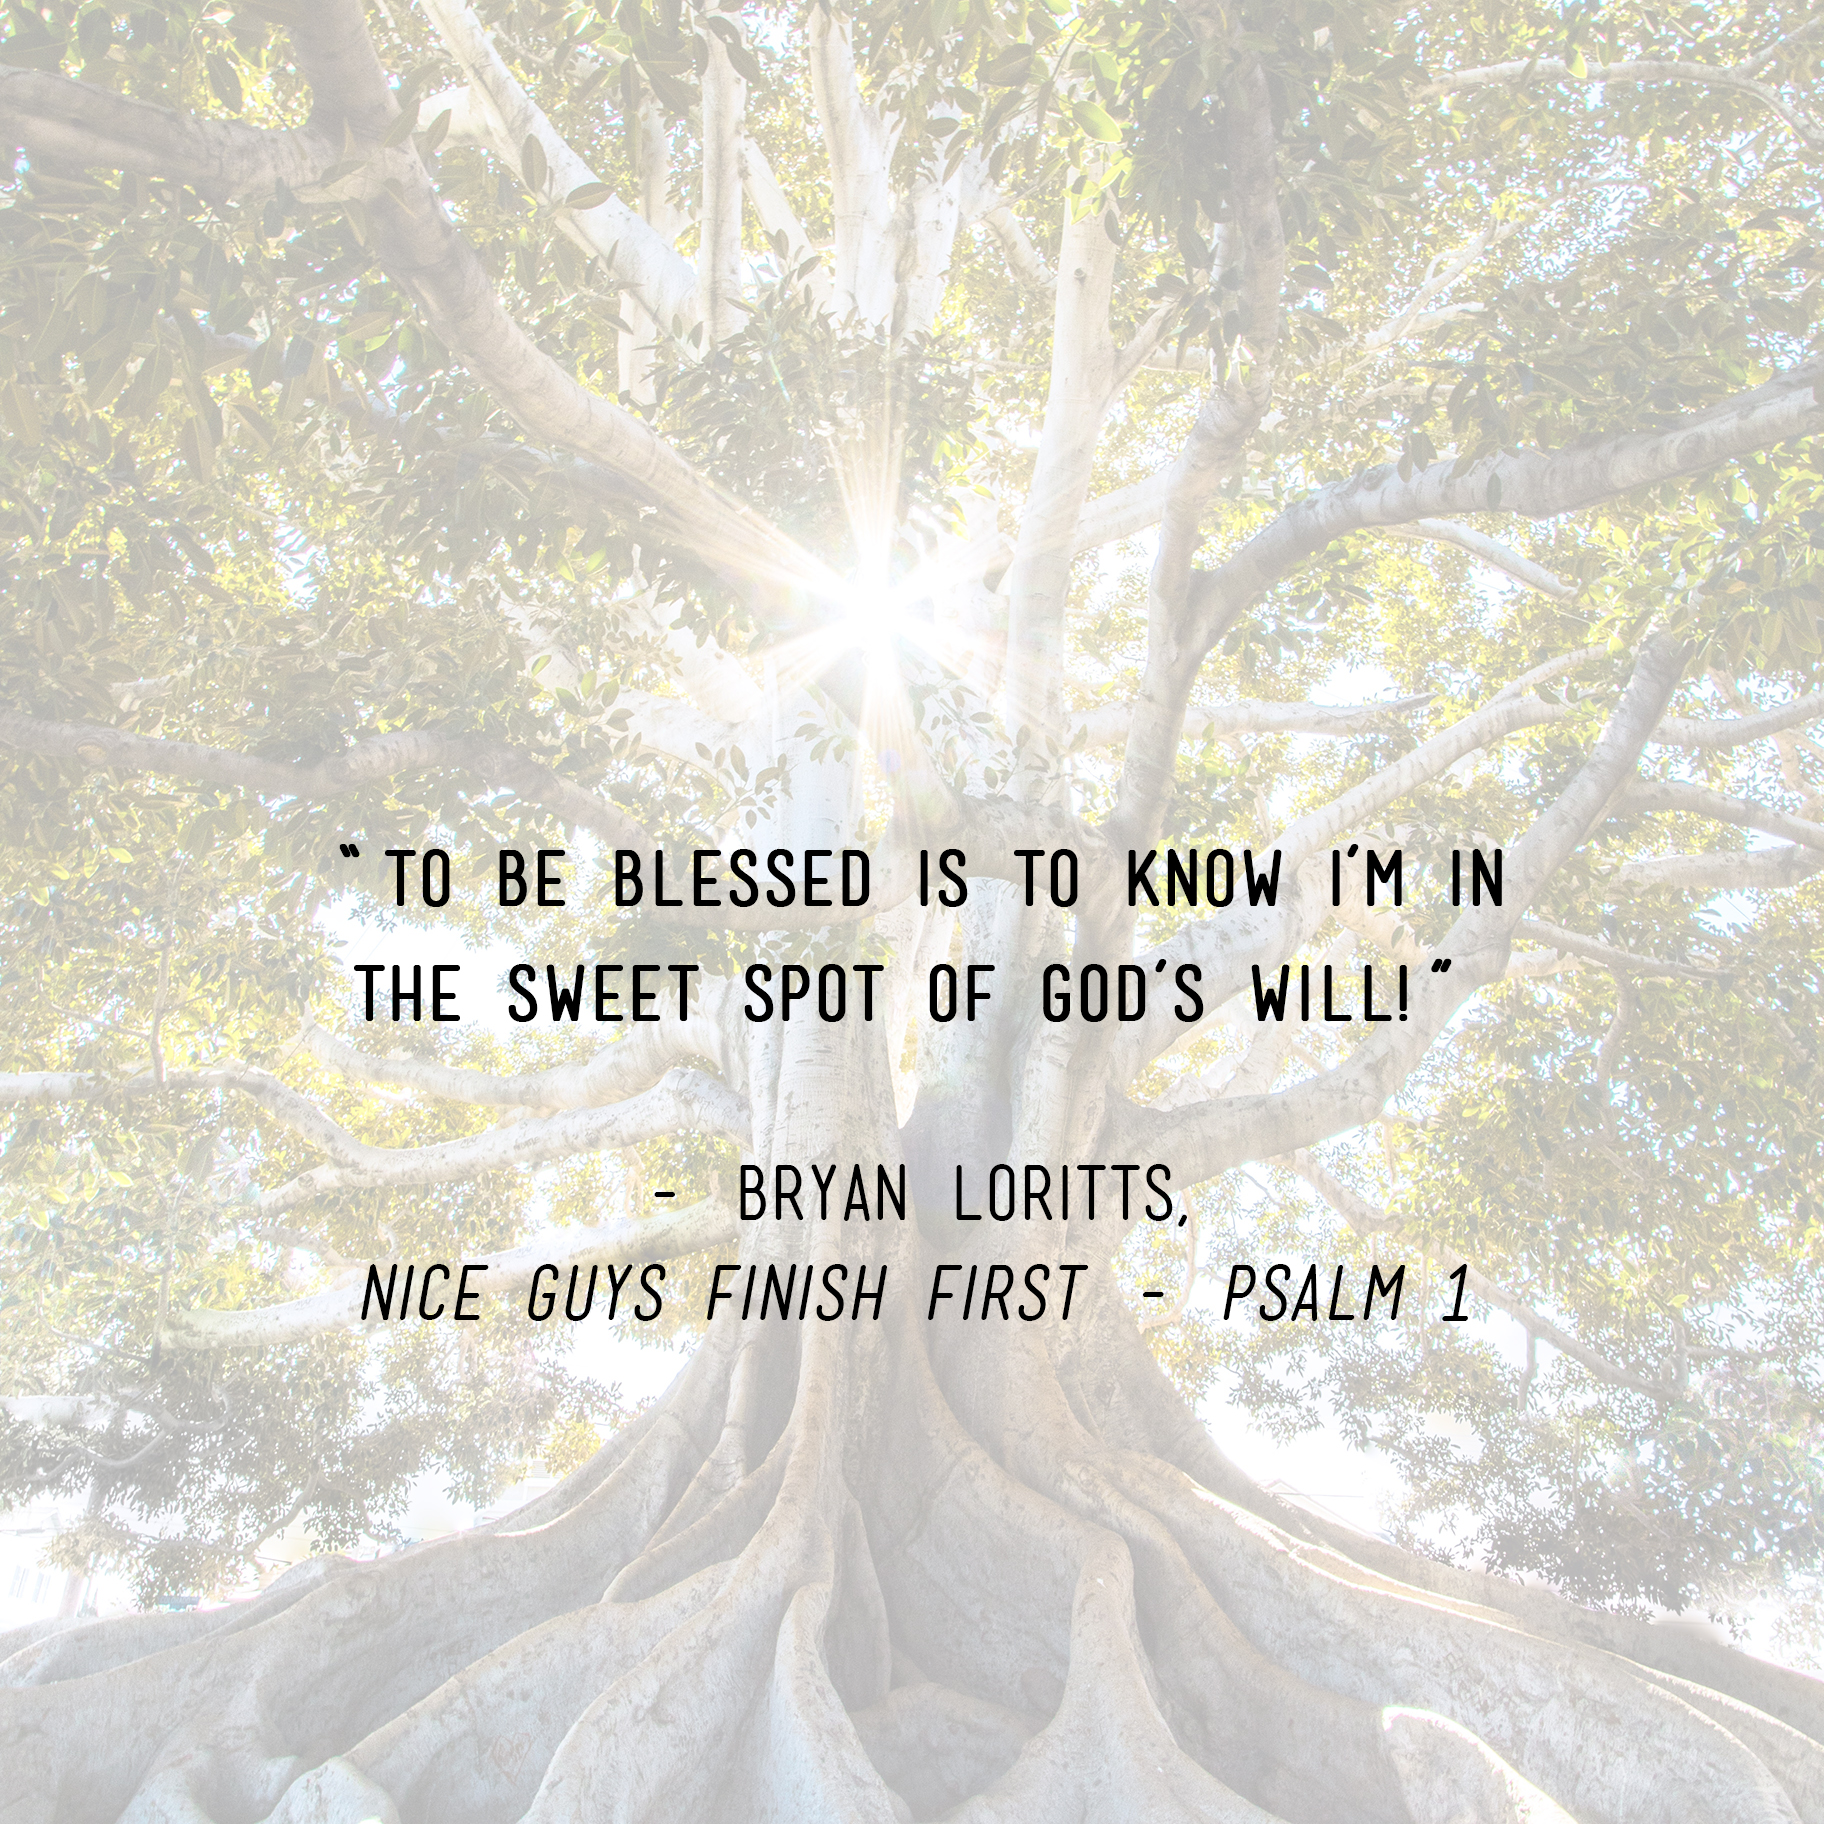 Bryan Loritts Quote 4